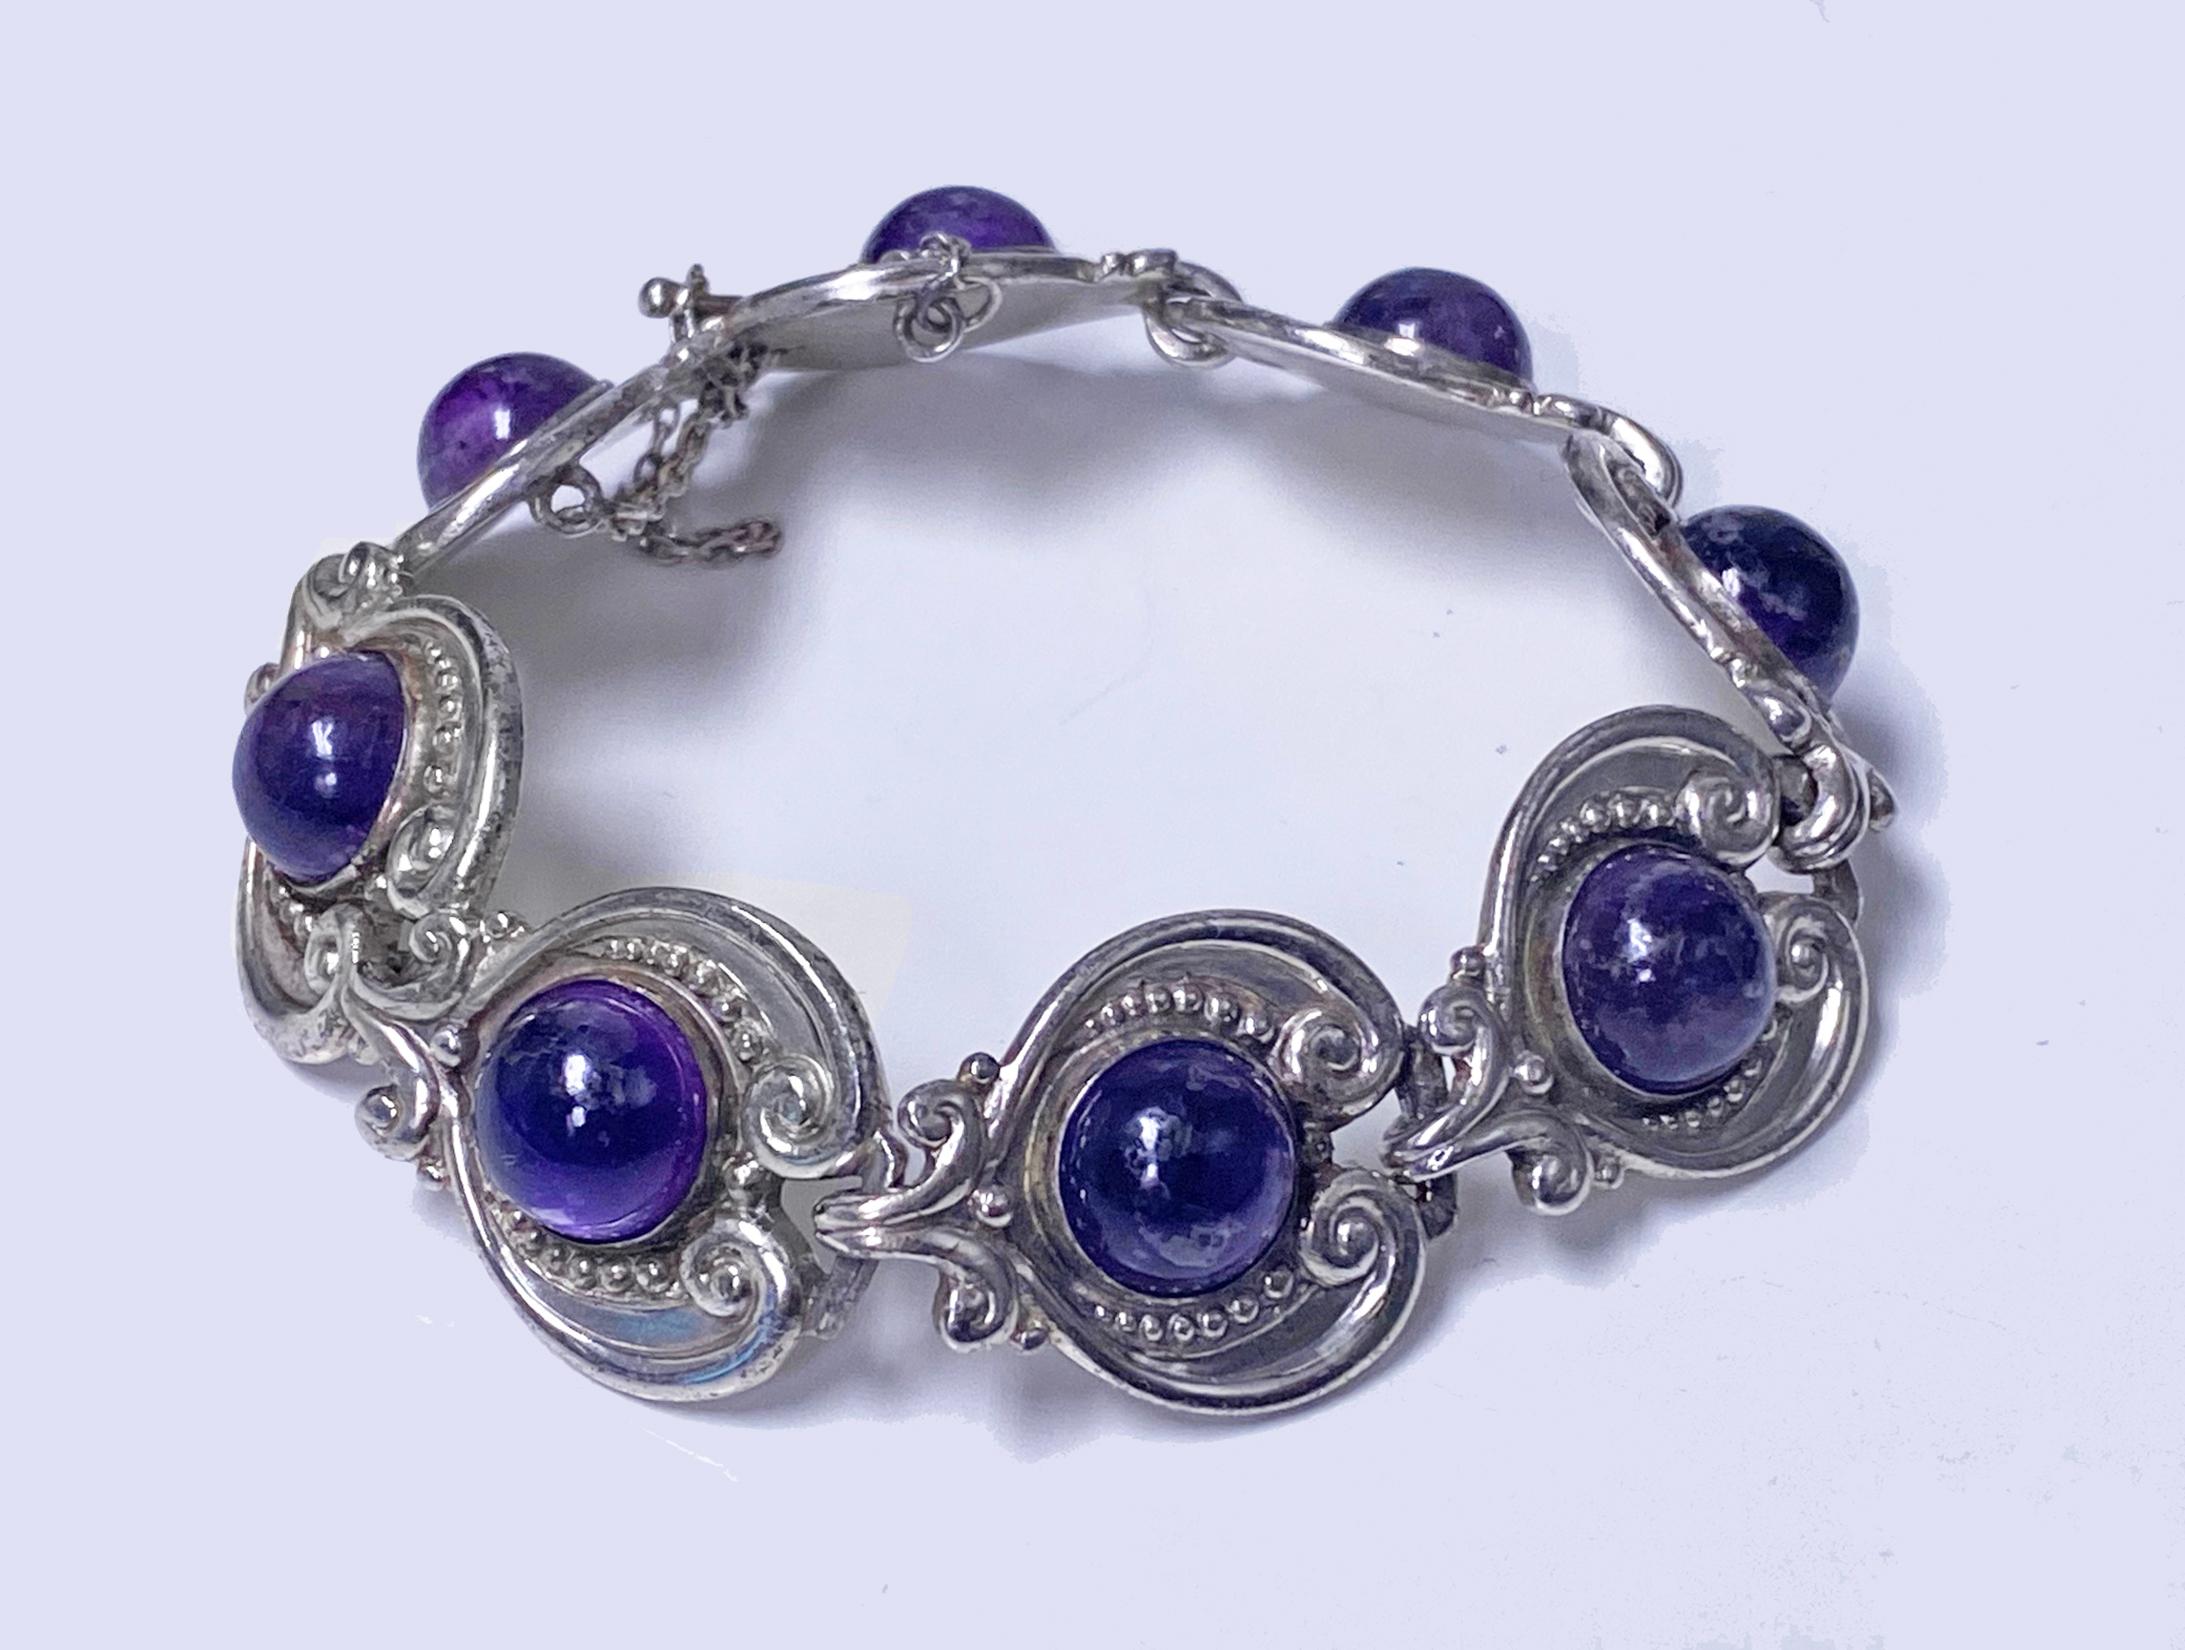 Margot de Taxco 1950’s Sterling Silver and Amethyst Bracelet. Sterling silver articulated bracelet with heart shaped links set with amethyst cabochons, each gauging approximately 10 mm, reverse stamped Margo de Taxco 5210, Sterling made in Mexico